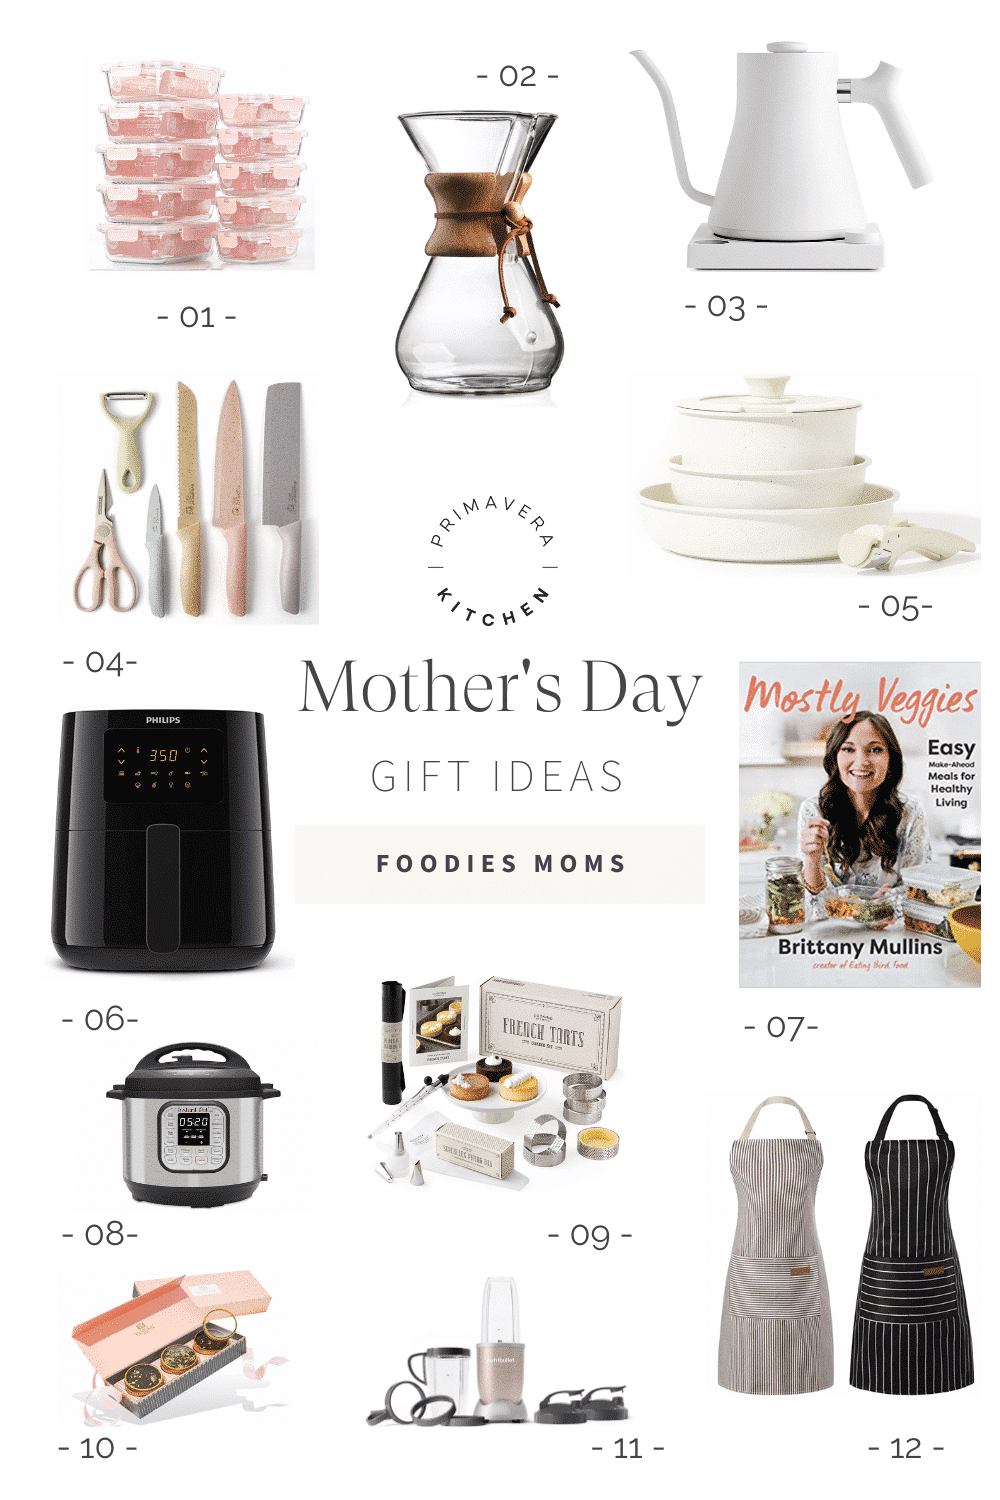 Some Mother's Day Gift Ideas